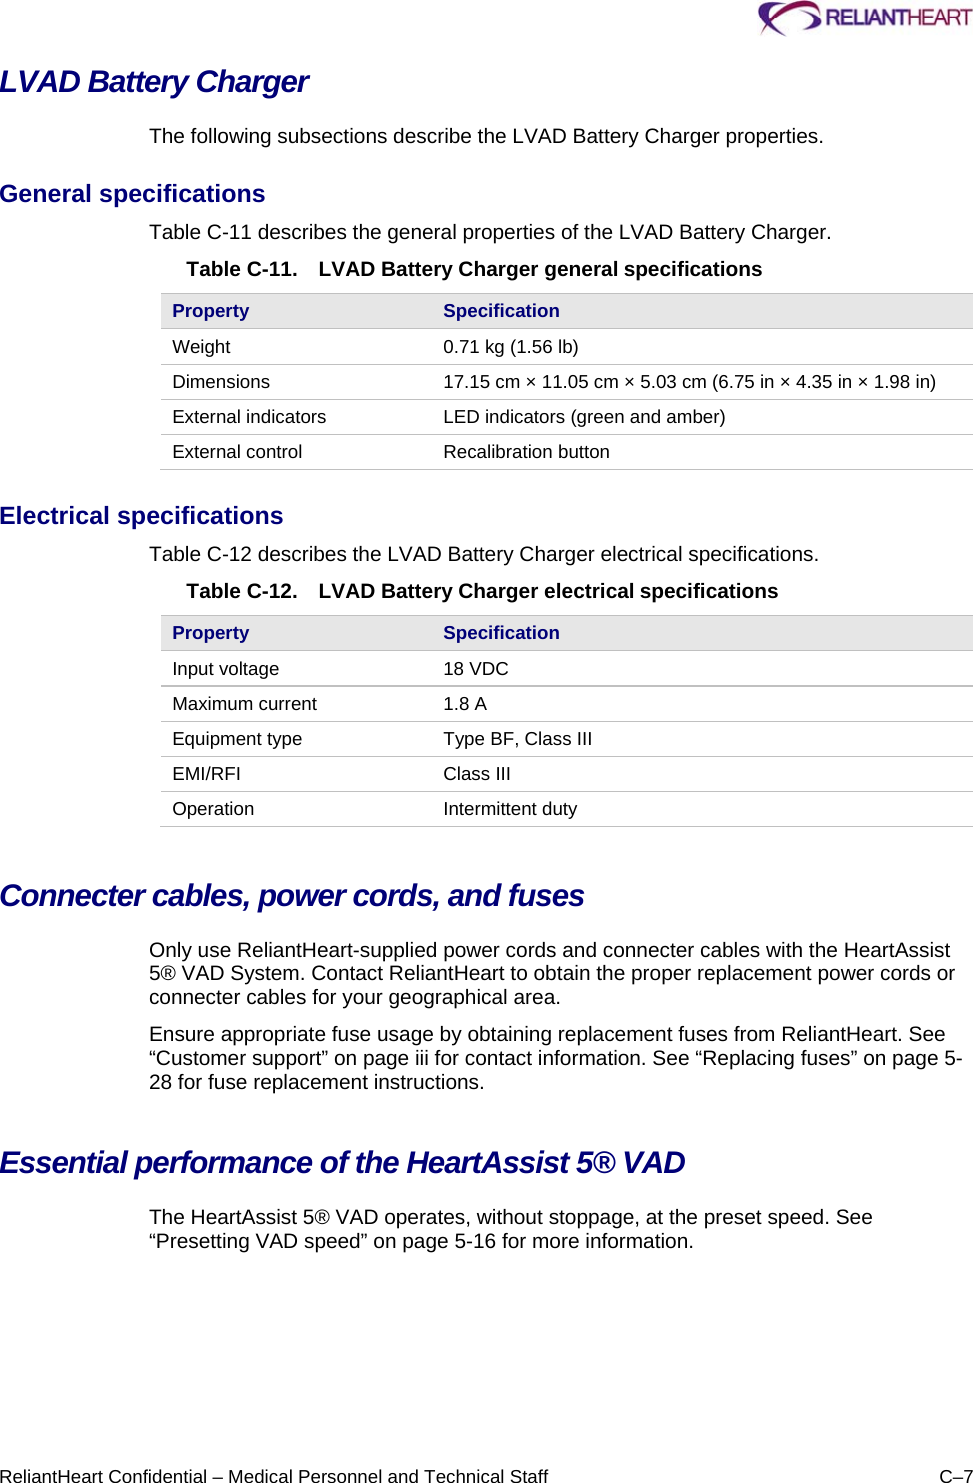     ReliantHeart Confidential – Medical Personnel and Technical Staff  C–7 LVAD Battery Charger  The following subsections describe the LVAD Battery Charger properties.  General specifications  Table C-11 describes the general properties of the LVAD Battery Charger.  Table C-11.  LVAD Battery Charger general specifications Property  Specification Weight   0.71 kg (1.56 lb)  Dimensions   17.15 cm × 11.05 cm × 5.03 cm (6.75 in × 4.35 in × 1.98 in)  External indicators   LED indicators (green and amber)  External control   Recalibration button  Electrical specifications  Table C-12 describes the LVAD Battery Charger electrical specifications.  Table C-12.  LVAD Battery Charger electrical specifications Property  Specification Input voltage   18 VDC  Maximum current   1.8 A  Equipment type   Type BF, Class III  EMI/RFI   Class III  Operation   Intermittent duty  Connecter cables, power cords, and fuses  Only use ReliantHeart-supplied power cords and connecter cables with the HeartAssist 5® VAD System. Contact ReliantHeart to obtain the proper replacement power cords or connecter cables for your geographical area.  Ensure appropriate fuse usage by obtaining replacement fuses from ReliantHeart. See “Customer support” on page iii for contact information. See “Replacing fuses” on page 5-28 for fuse replacement instructions. Essential performance of the HeartAssist 5® VAD The HeartAssist 5® VAD operates, without stoppage, at the preset speed. See “Presetting VAD speed” on page 5-16 for more information. 